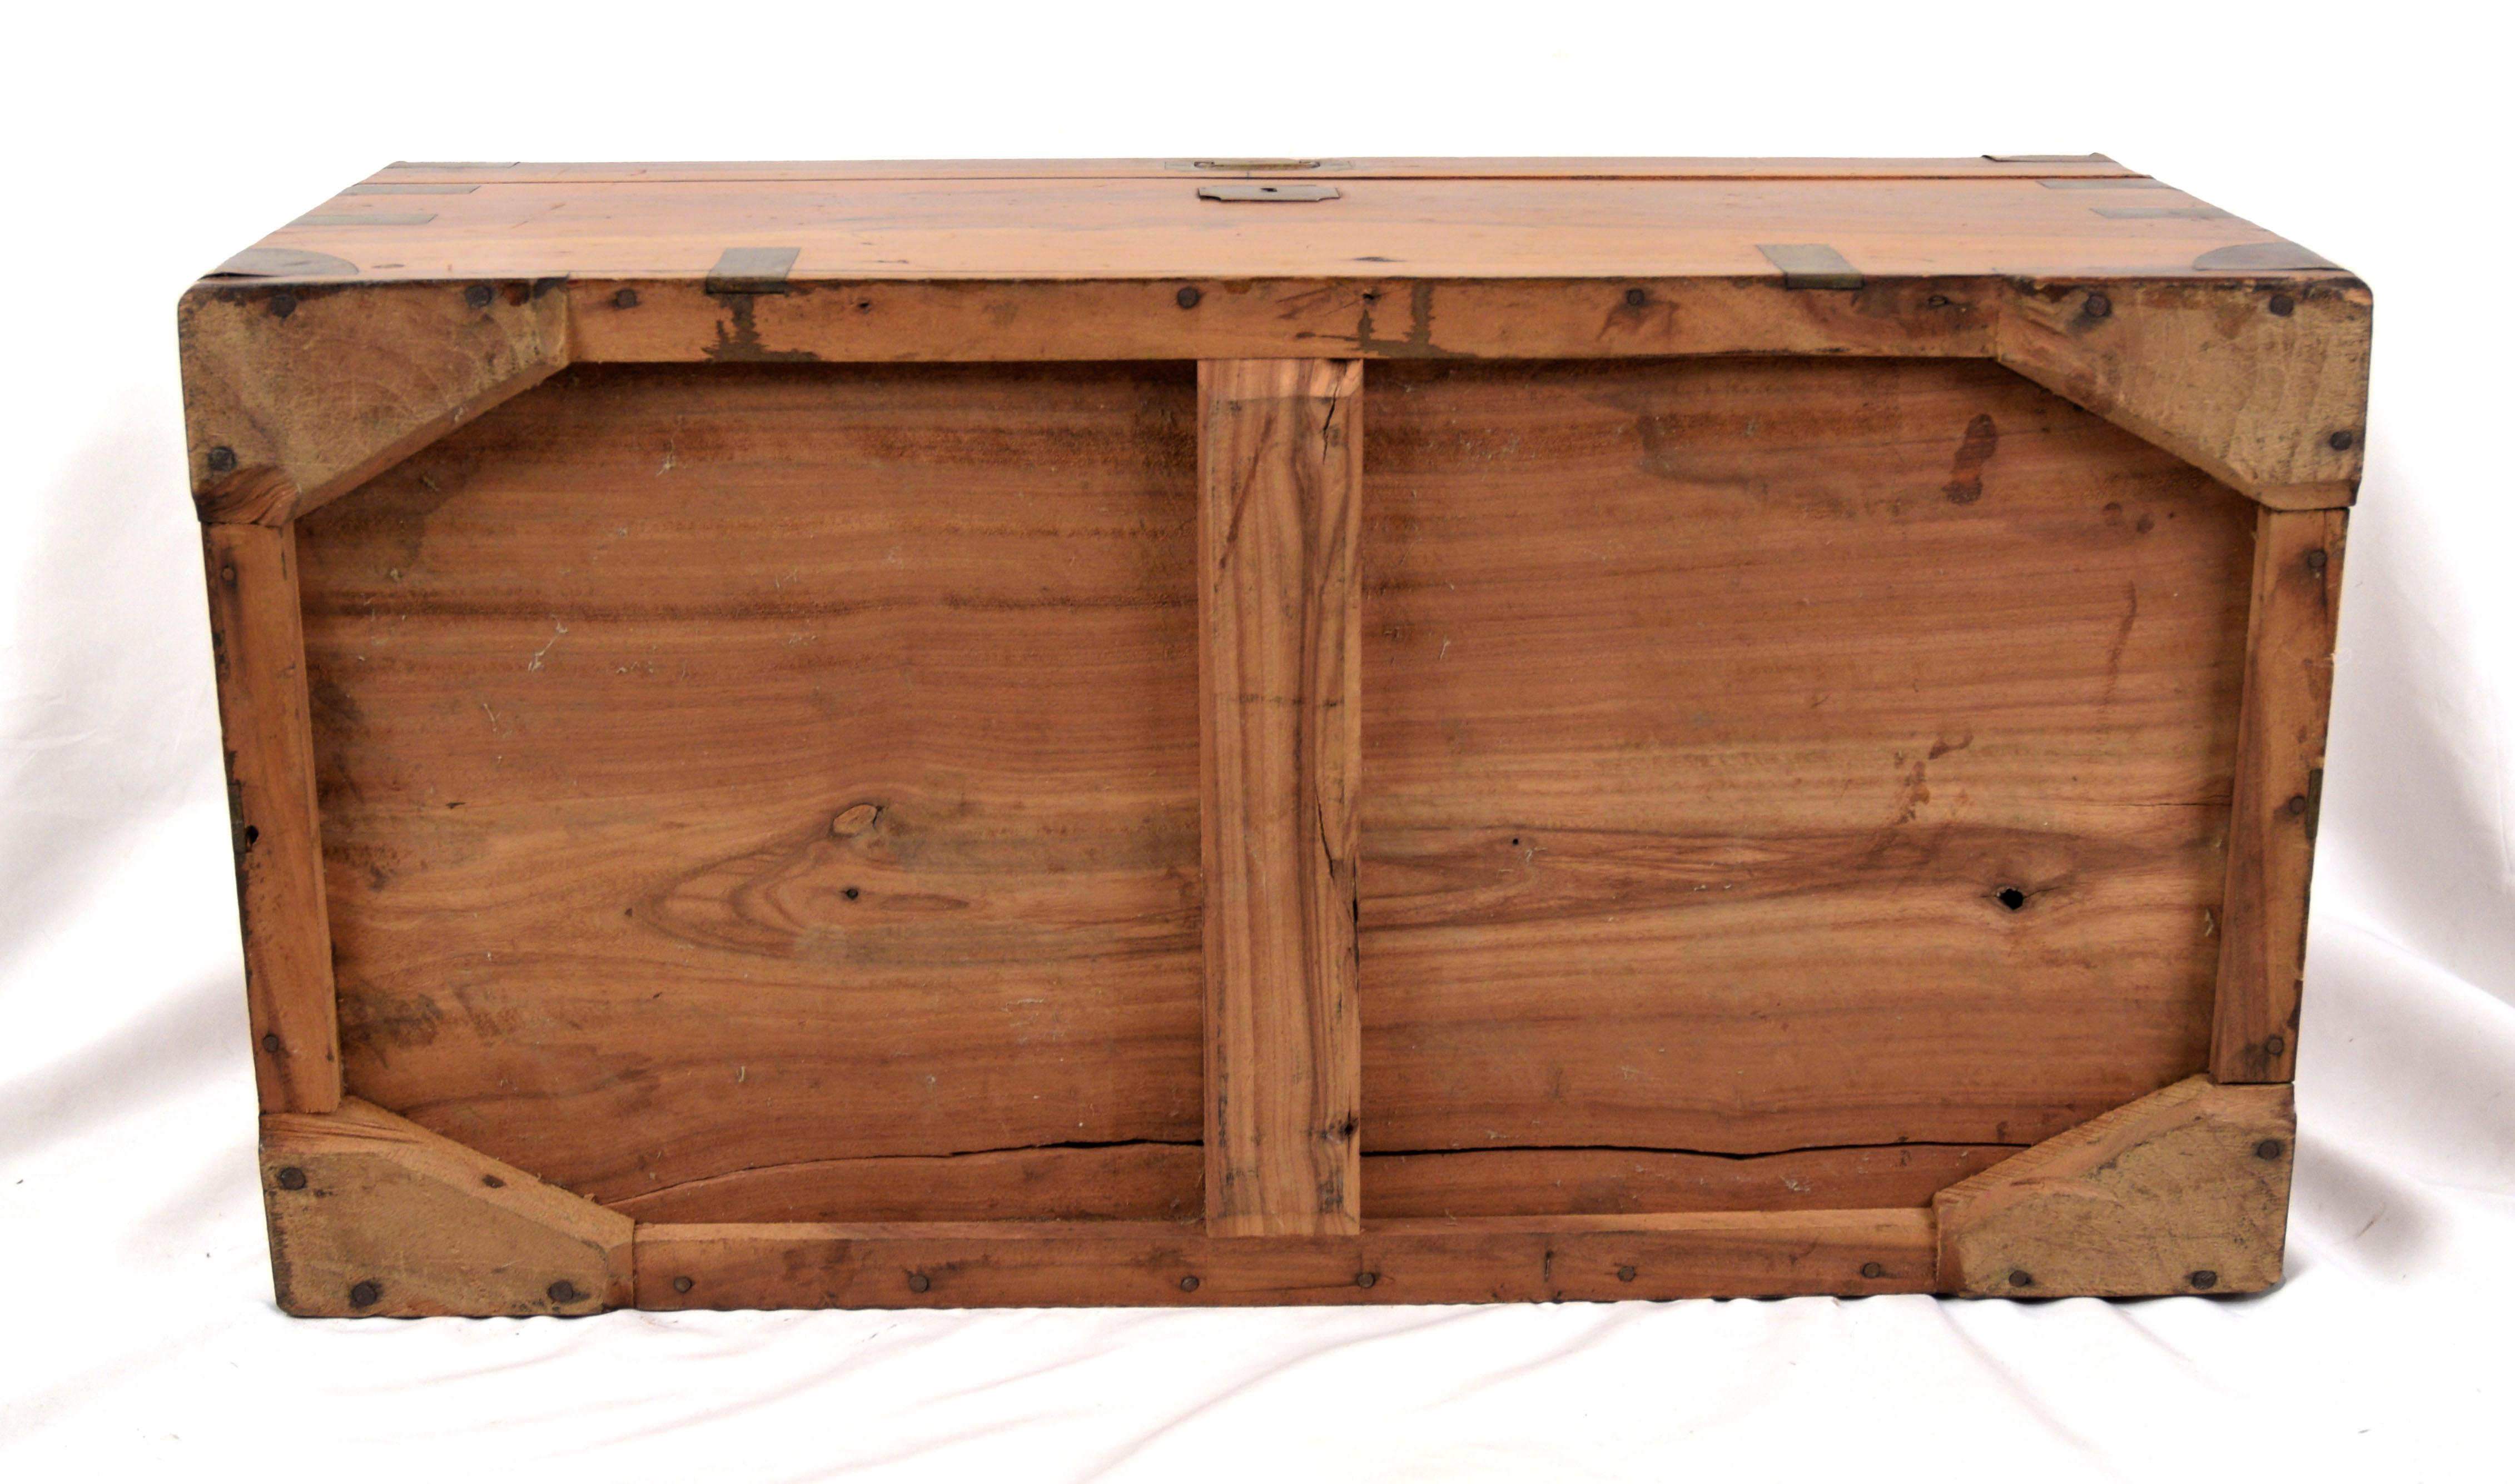 Camphorwood Campaign Chest - Late 19th Century Chinese Export Case (Medium) For Sale 4